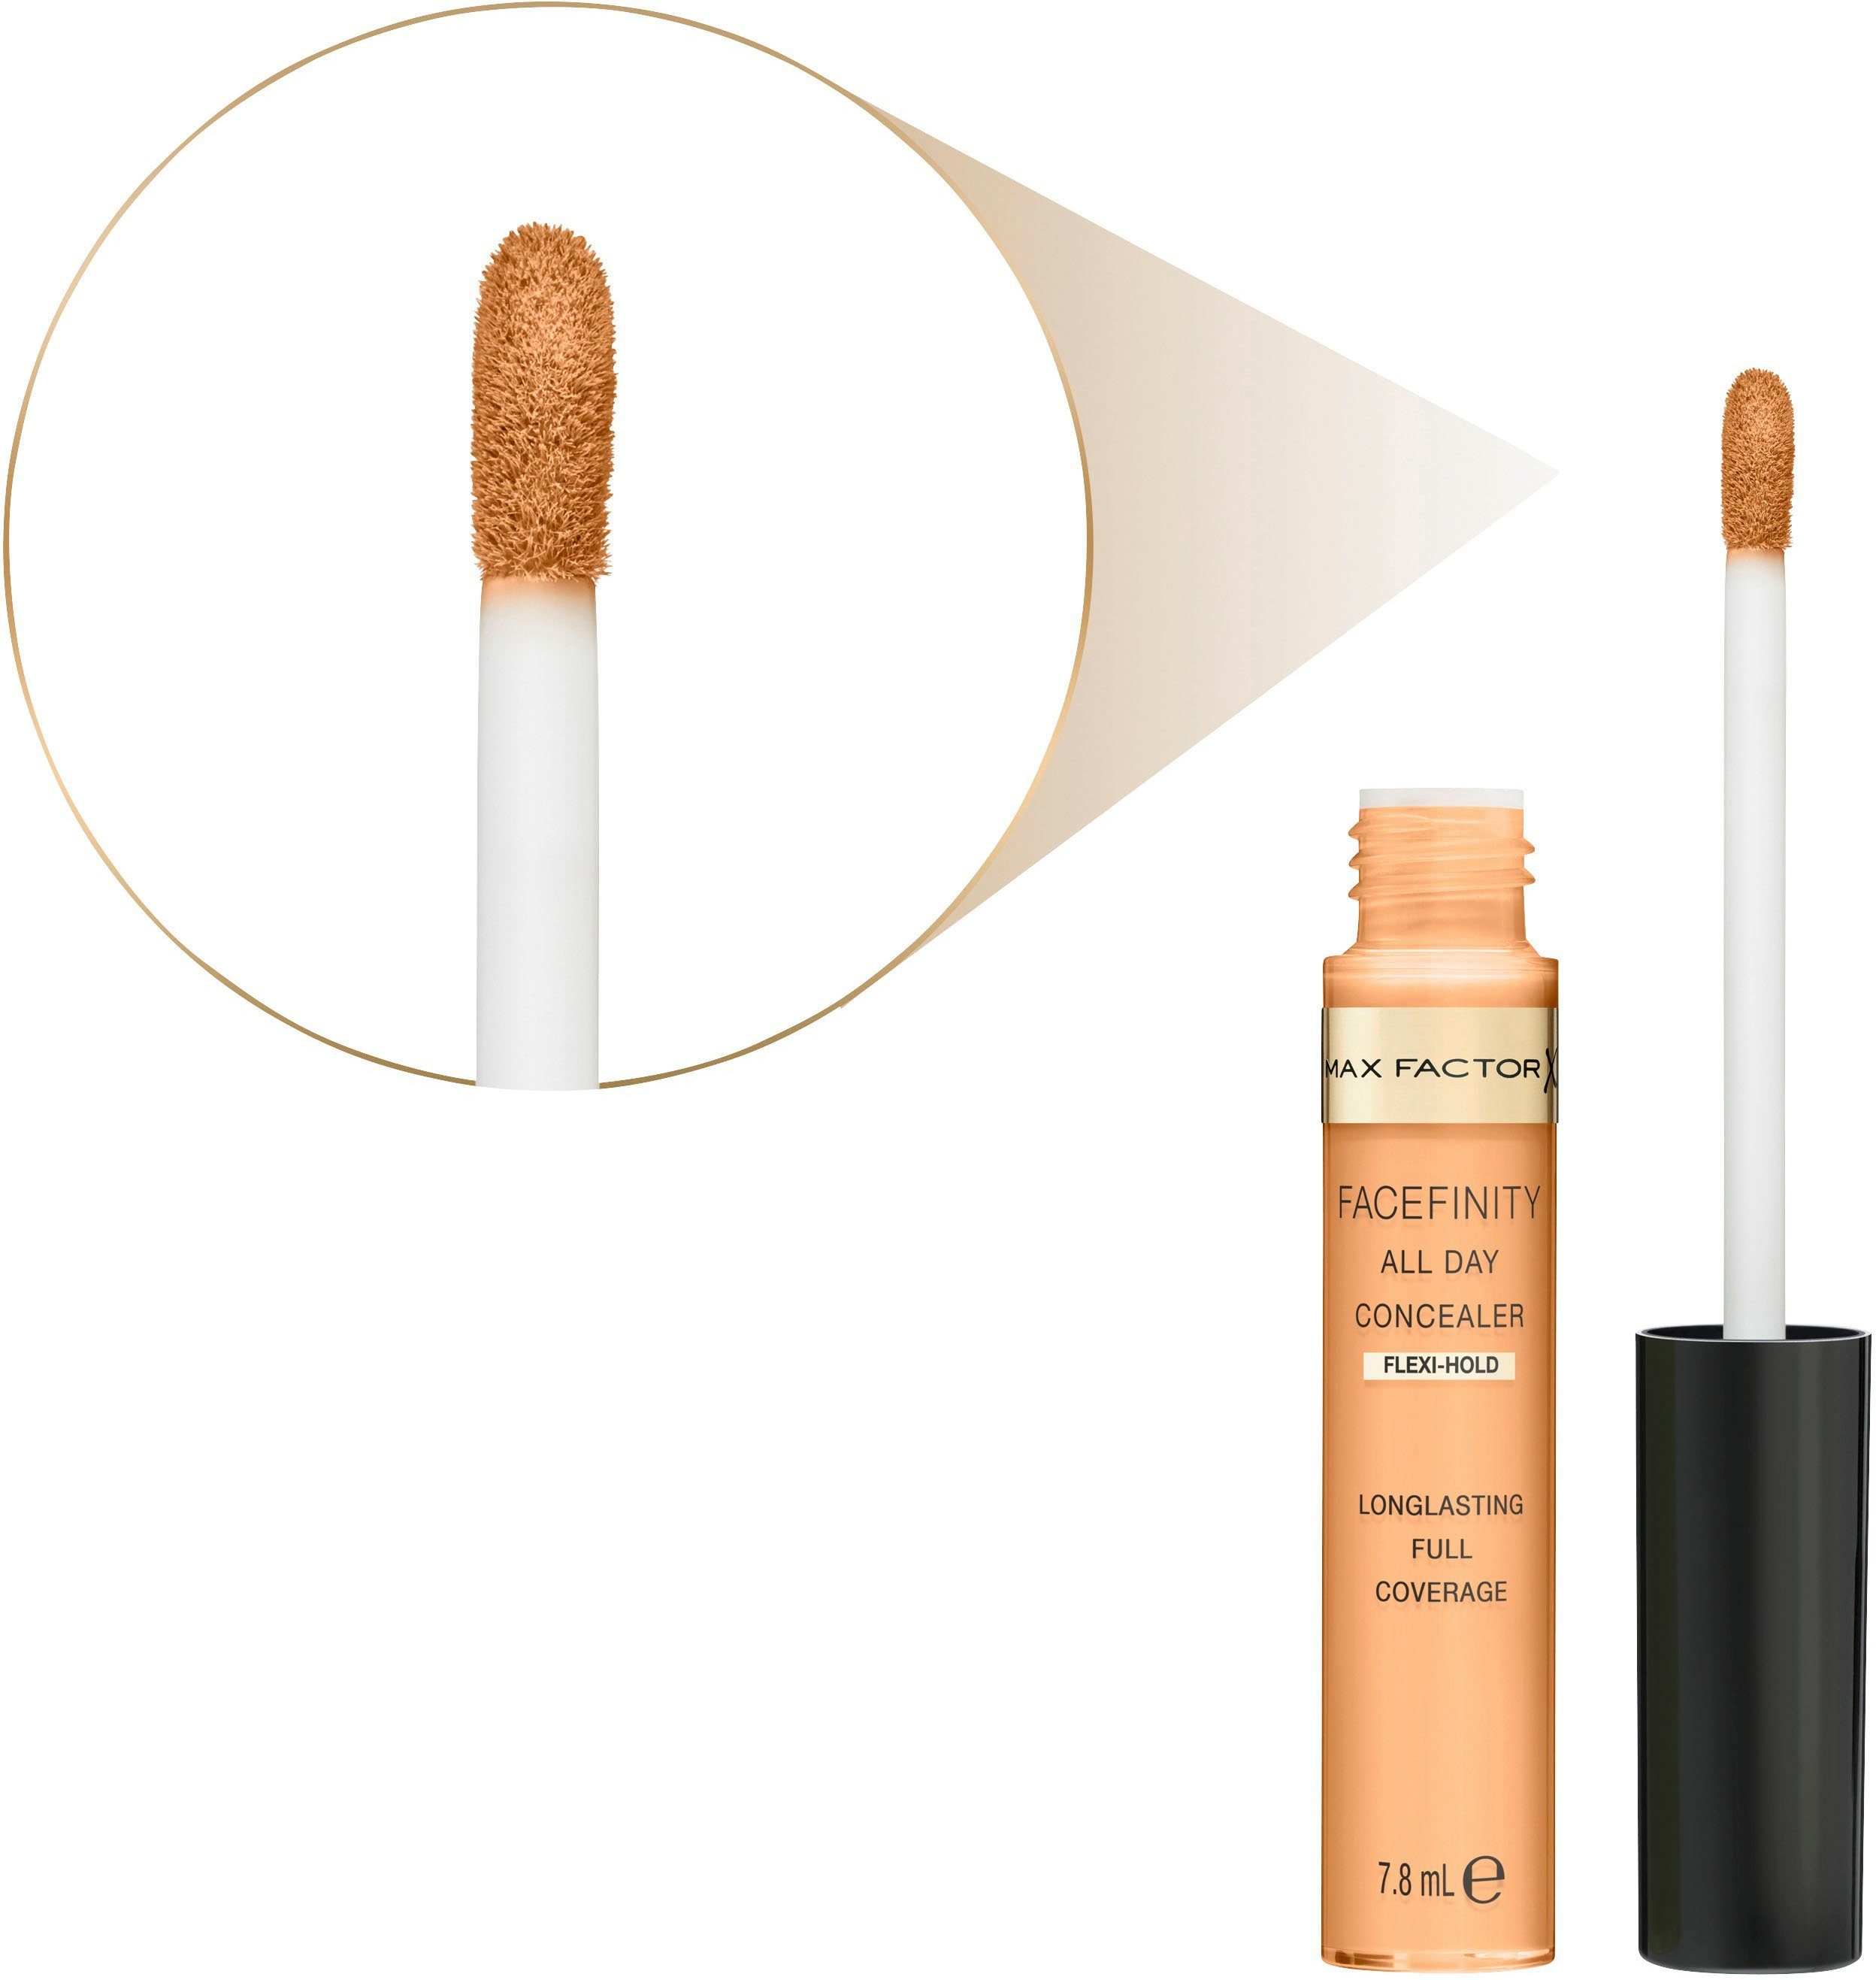 MAX FACTOR Concealer FACEFINITY 70 Day Flawless All